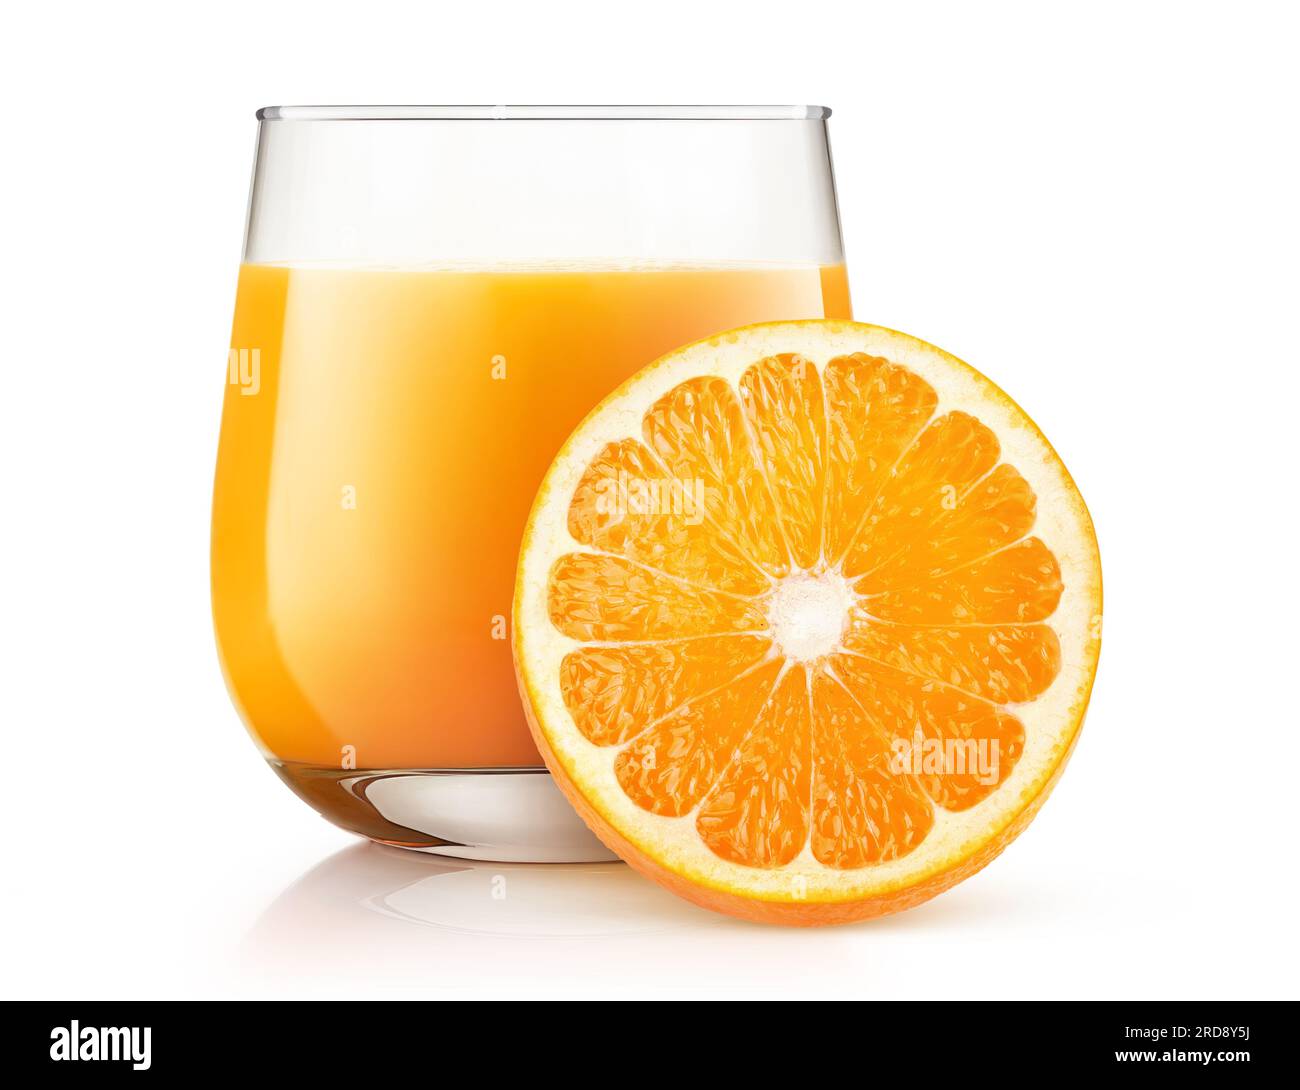 https://c8.alamy.com/comp/2RD8Y5J/orange-juice-in-a-glass-and-slice-of-orange-fruit-isolated-on-white-background-2RD8Y5J.jpg